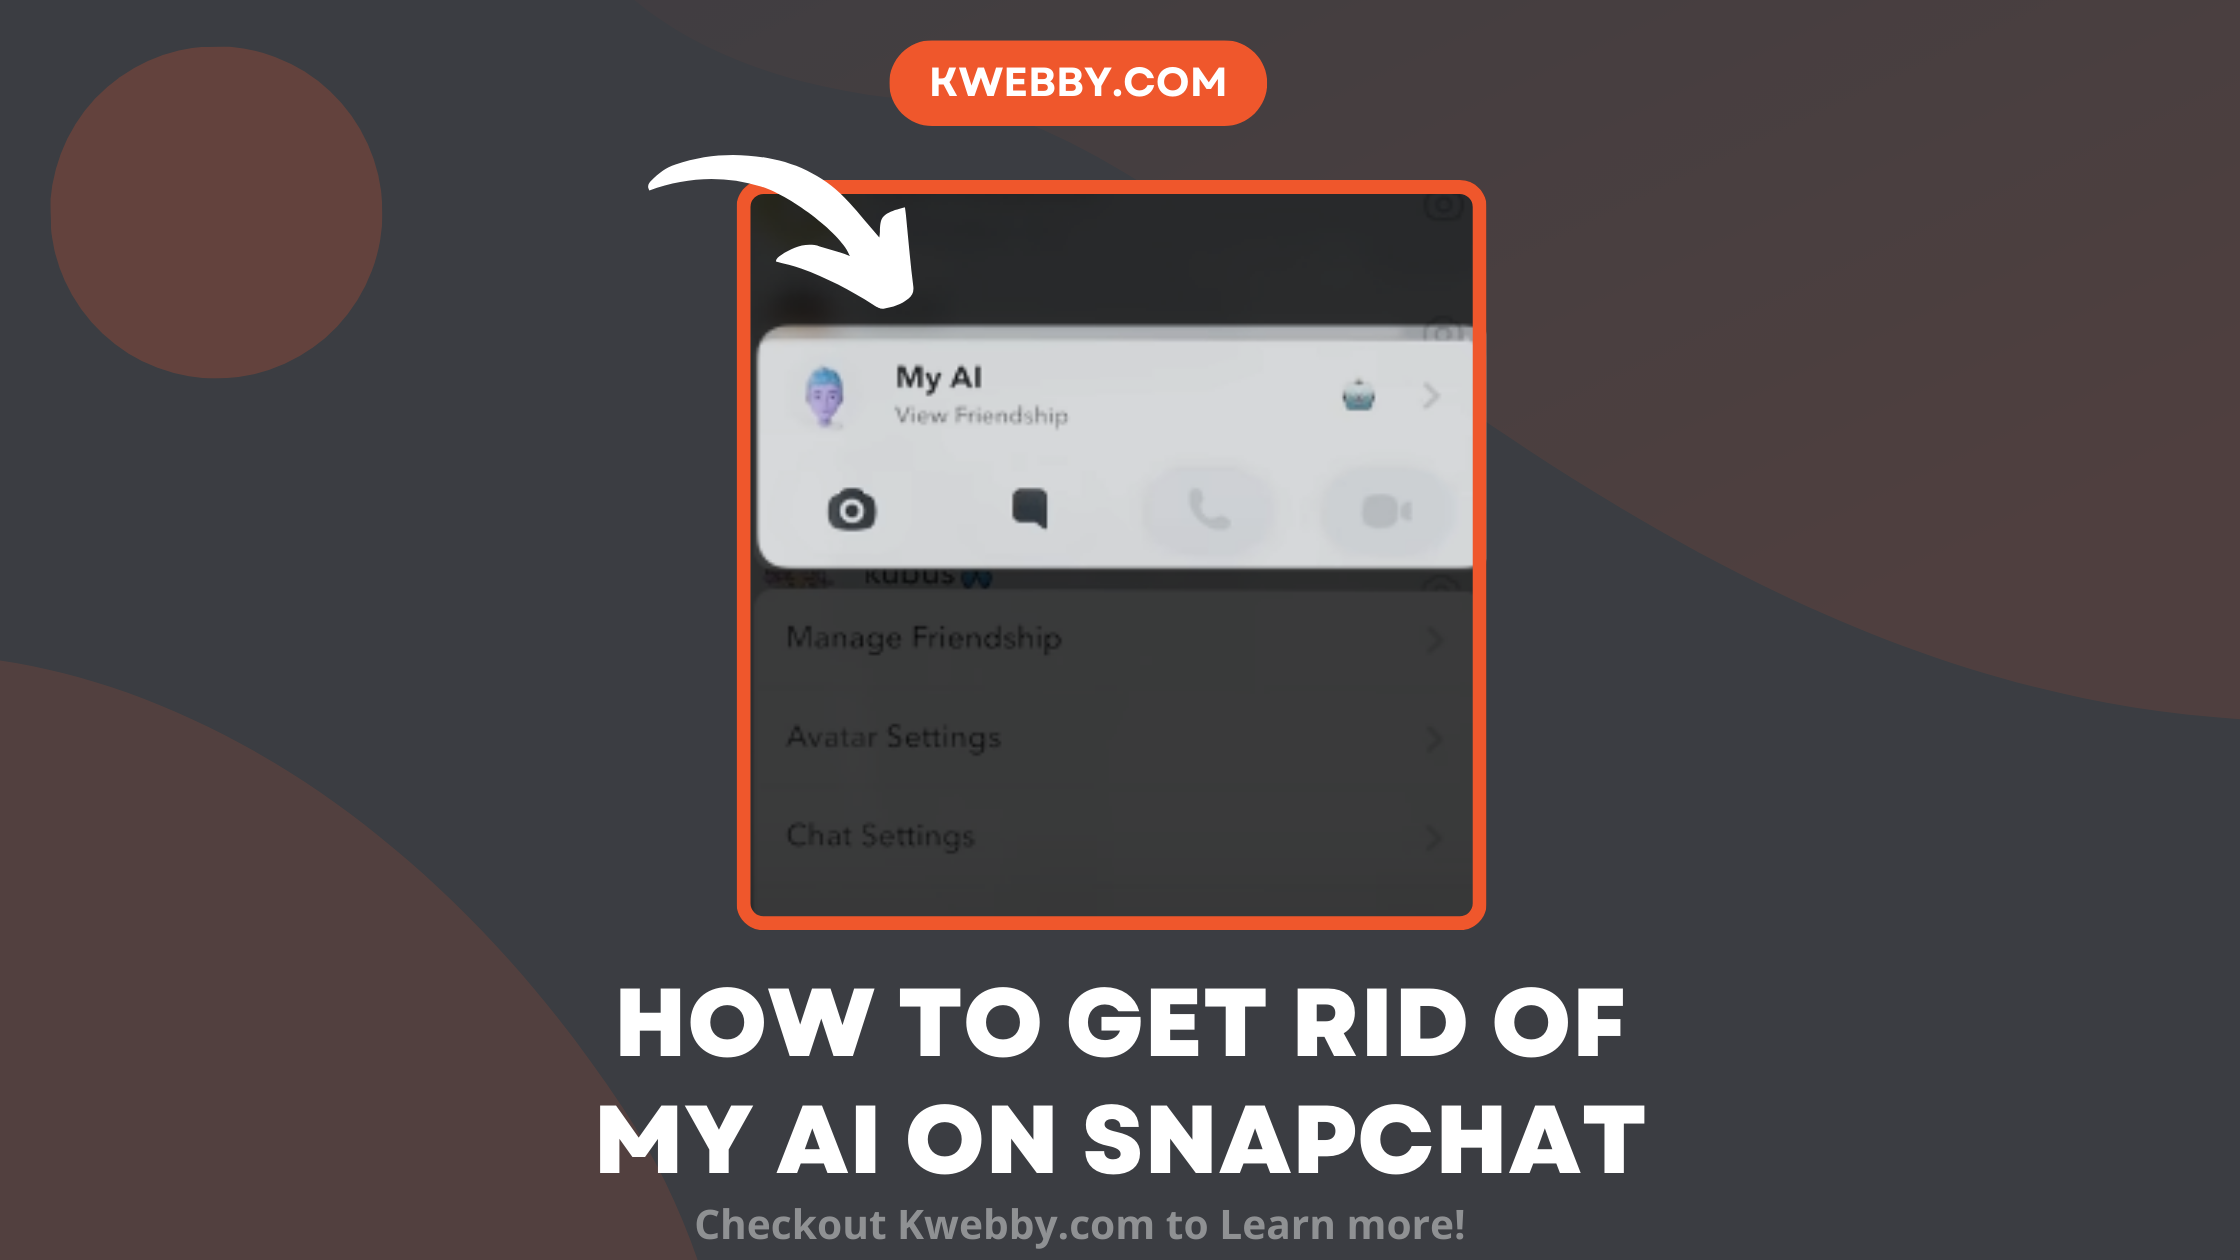 How to get rid of My AI on Snapchat